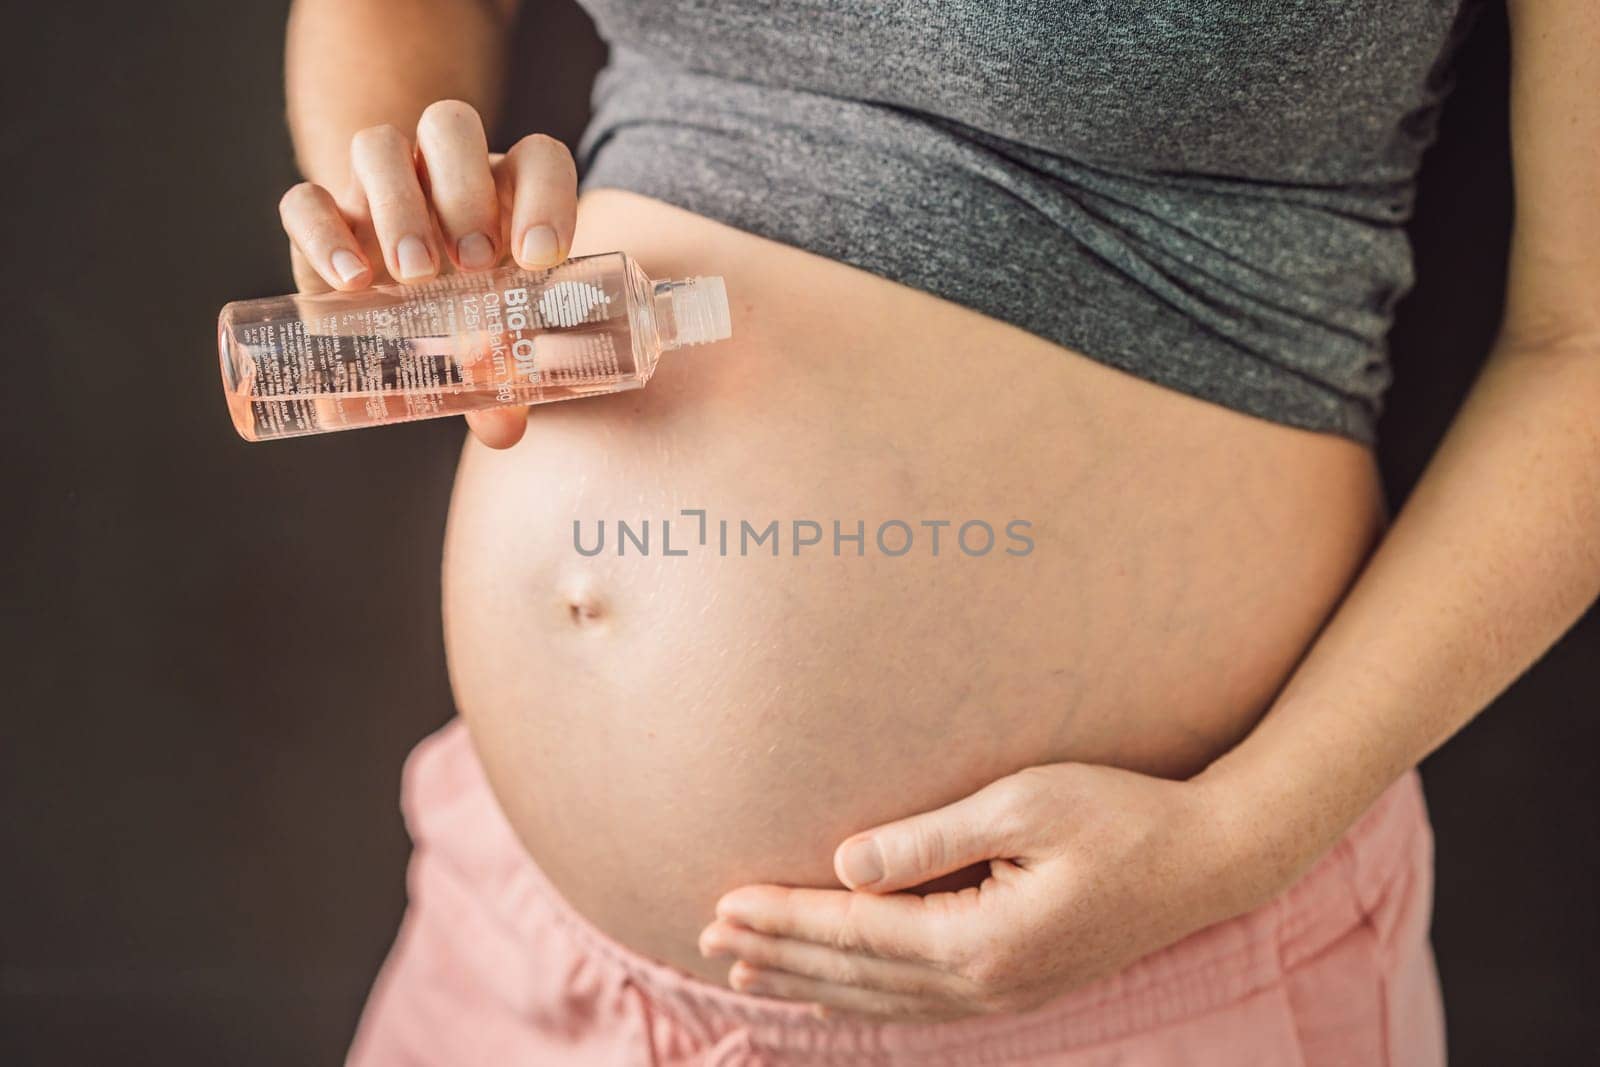 Turkiye, Antalya 02.02.2022: Woman holds Bio Oil, a nurturing choice for pregnant women. A soothing image of care and wellness during pregnancy.